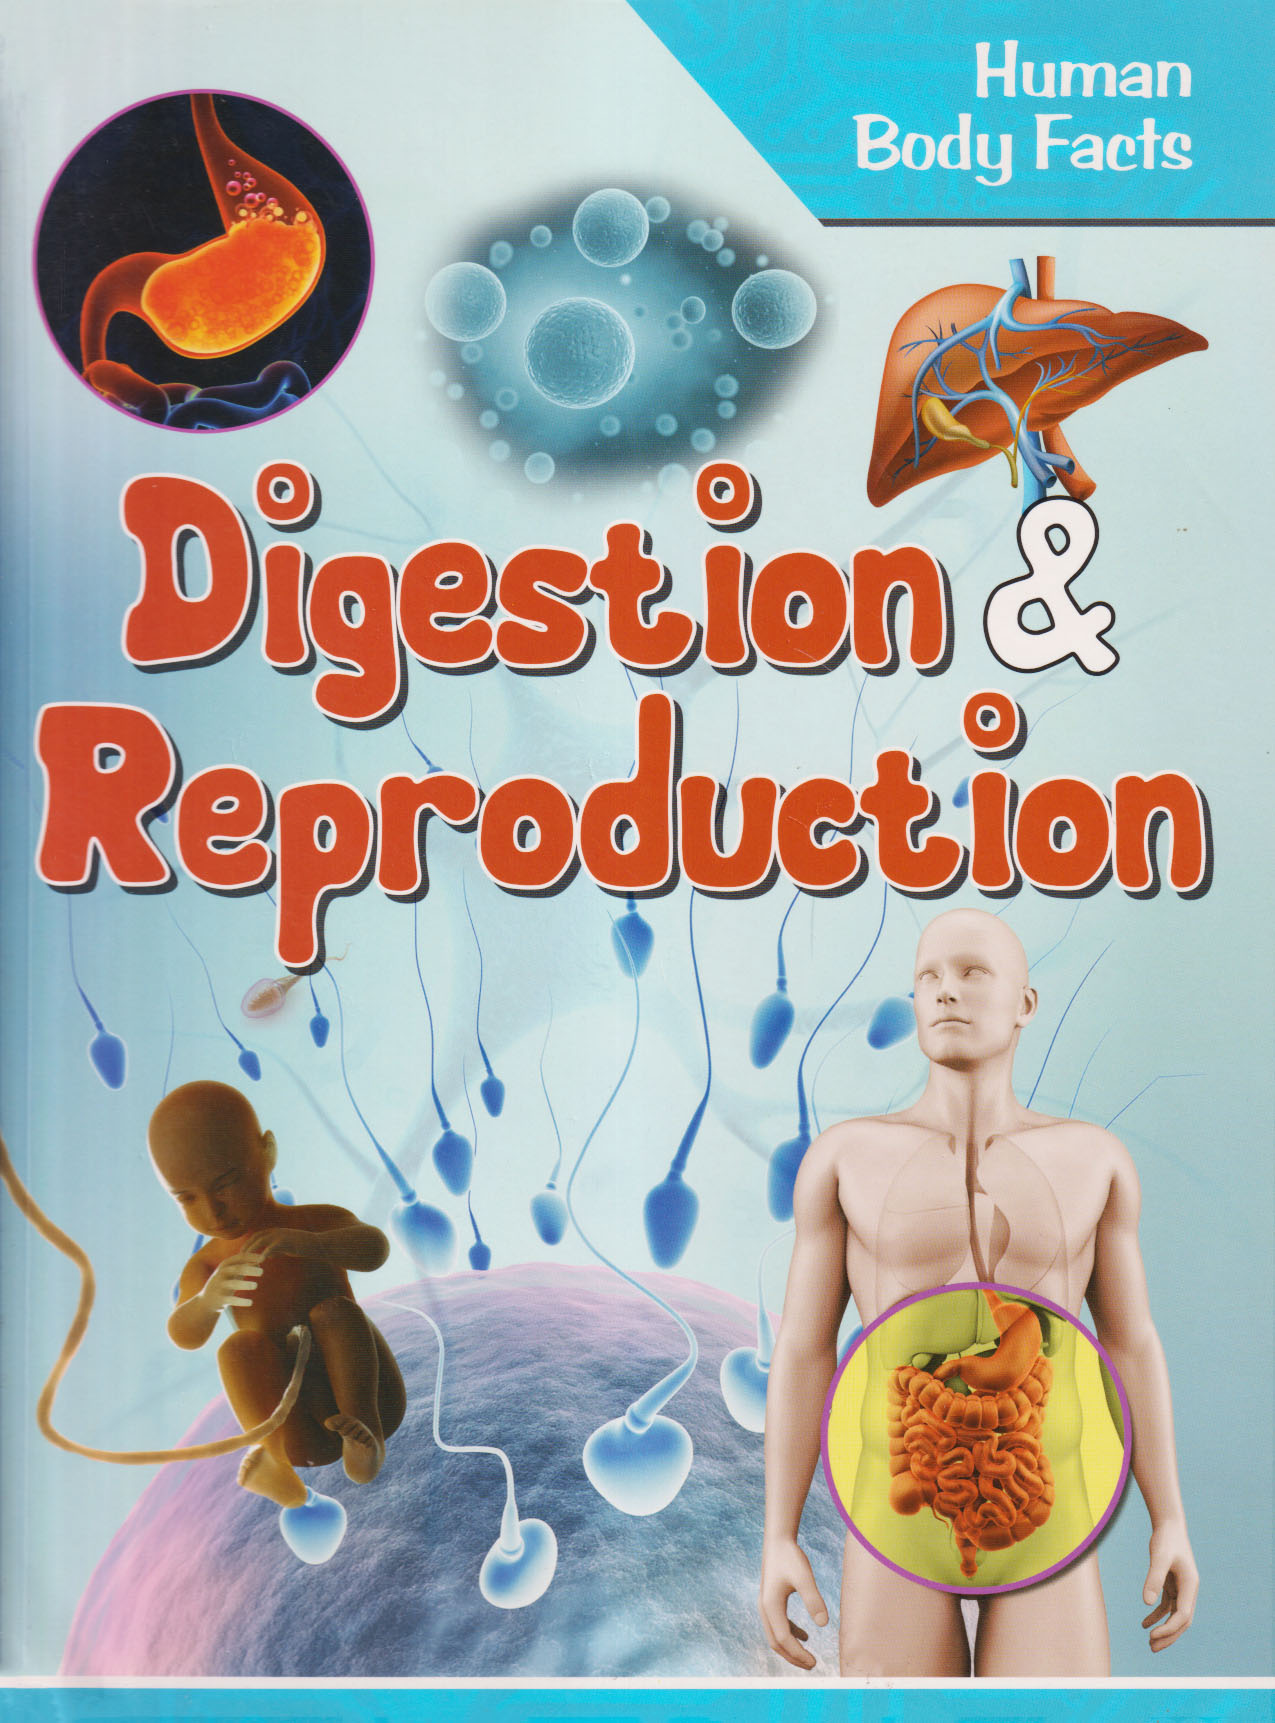 Human Body Facts: Digestion & Reproduction (পেপারব্যাক)